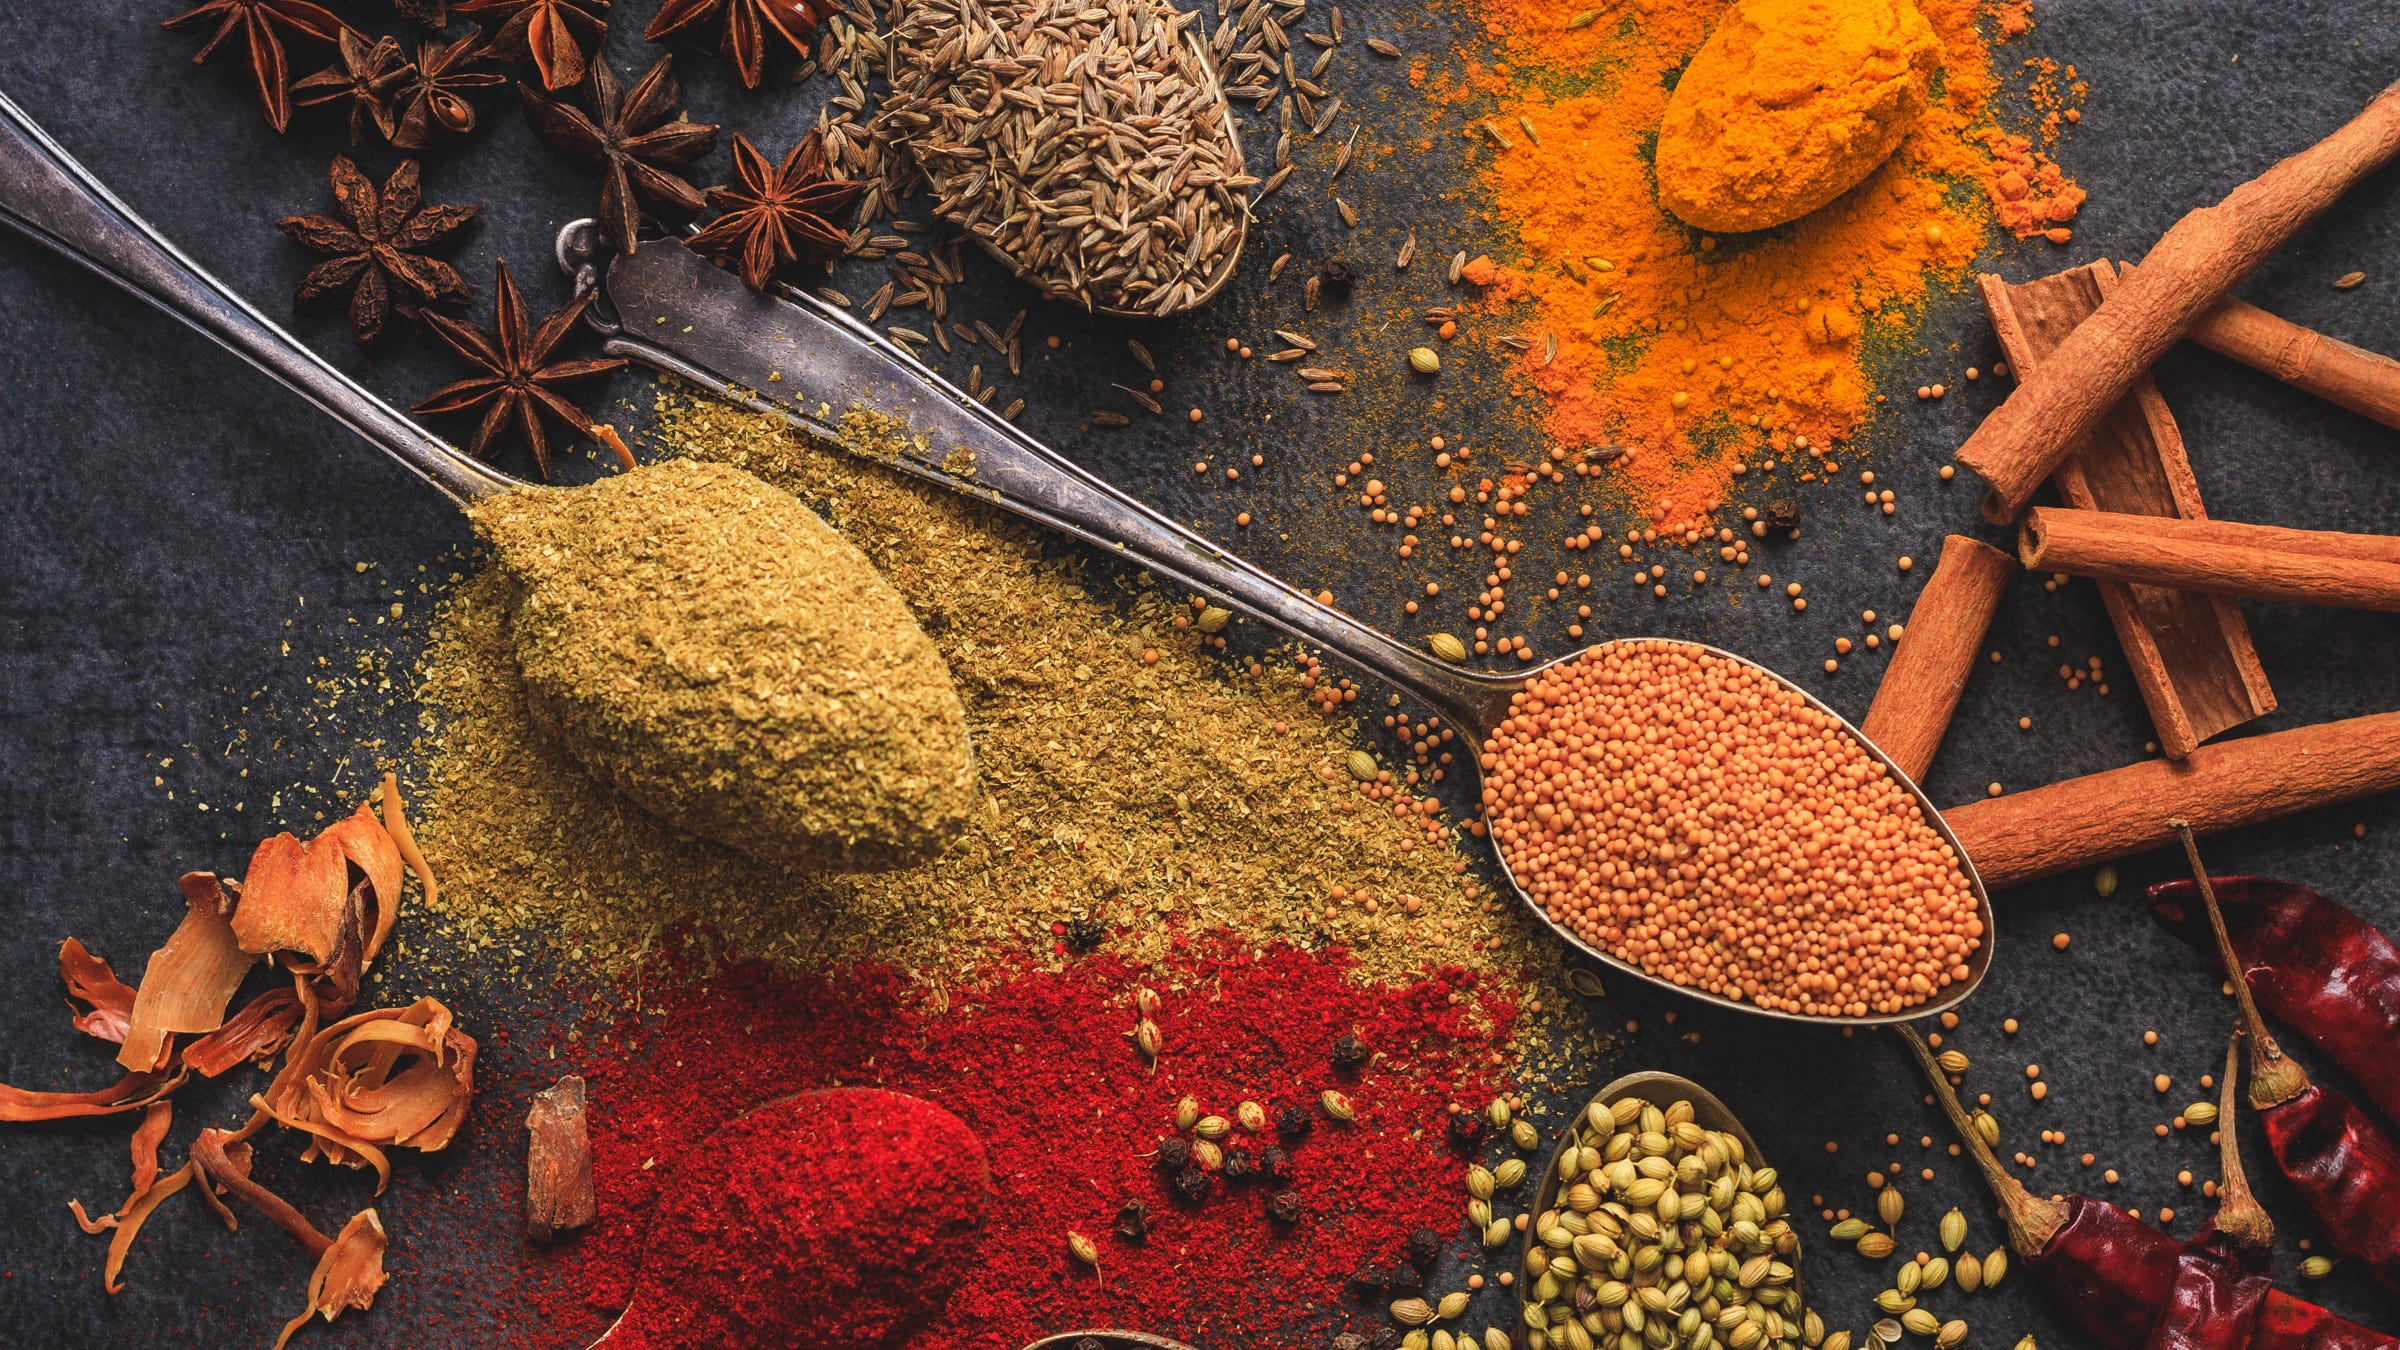 Spices Photography by Ajay Walia